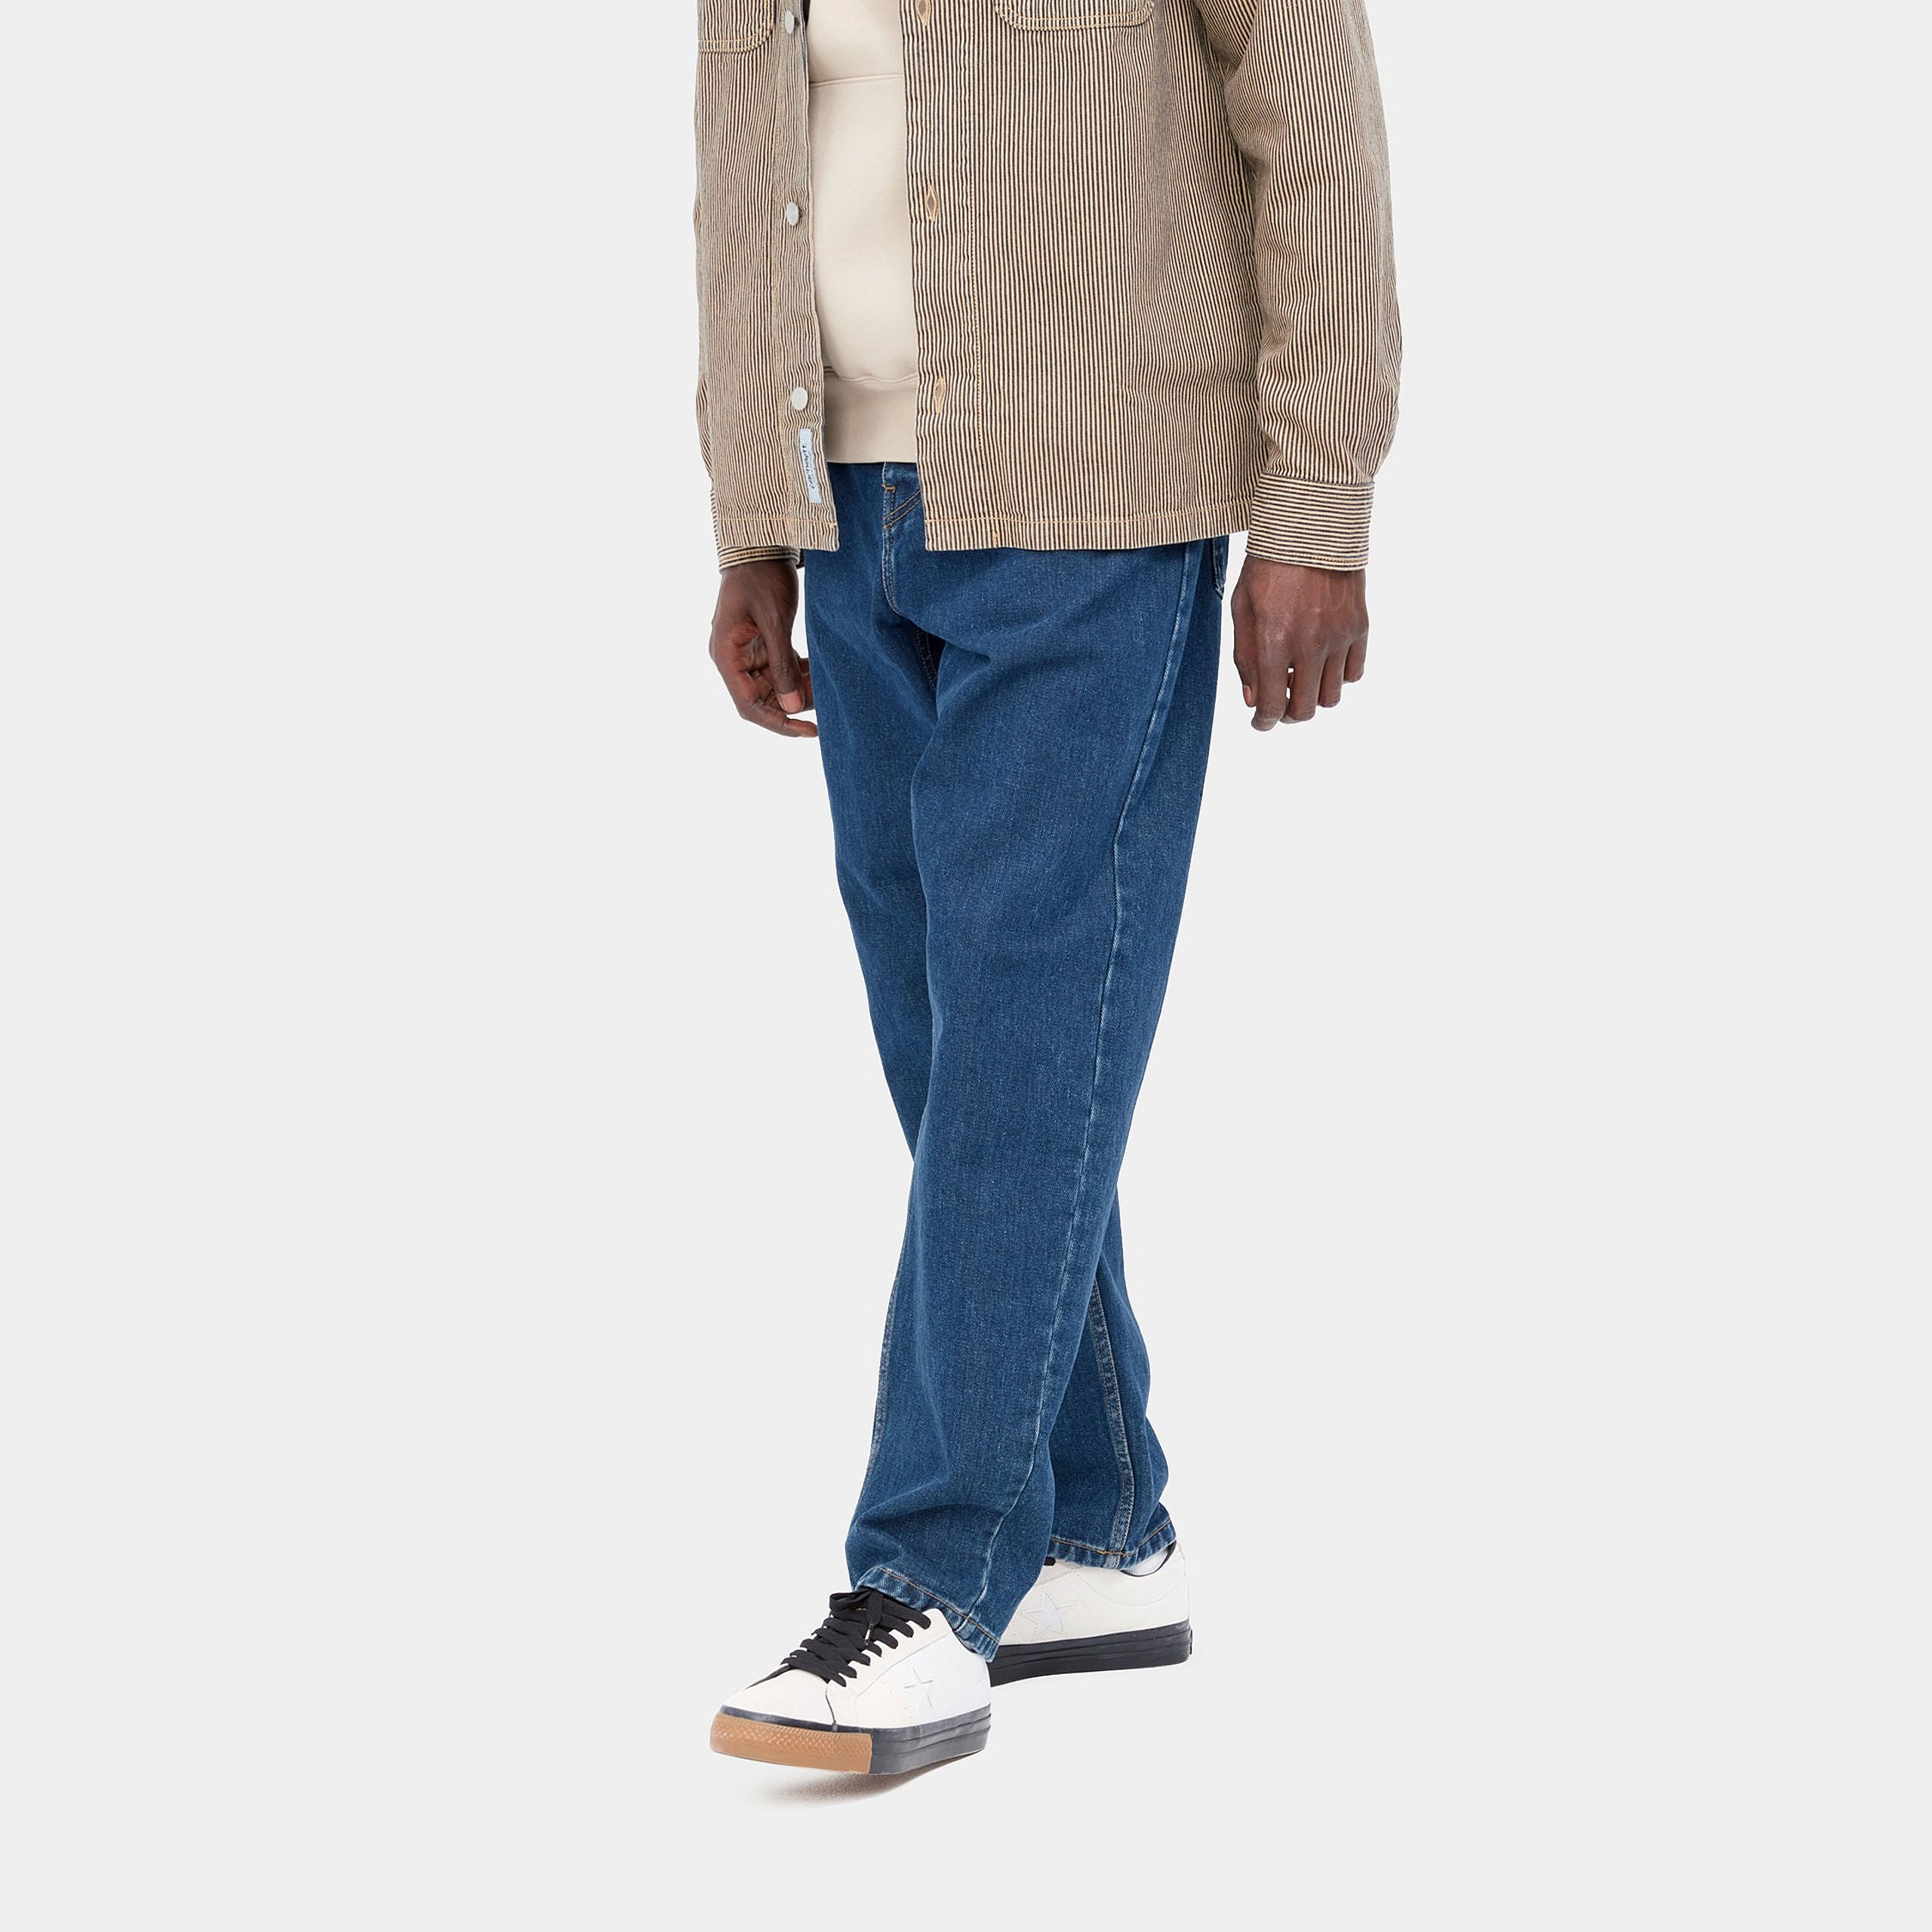 Carhartt WIP   Newel Pant Cotton Blue stone washed